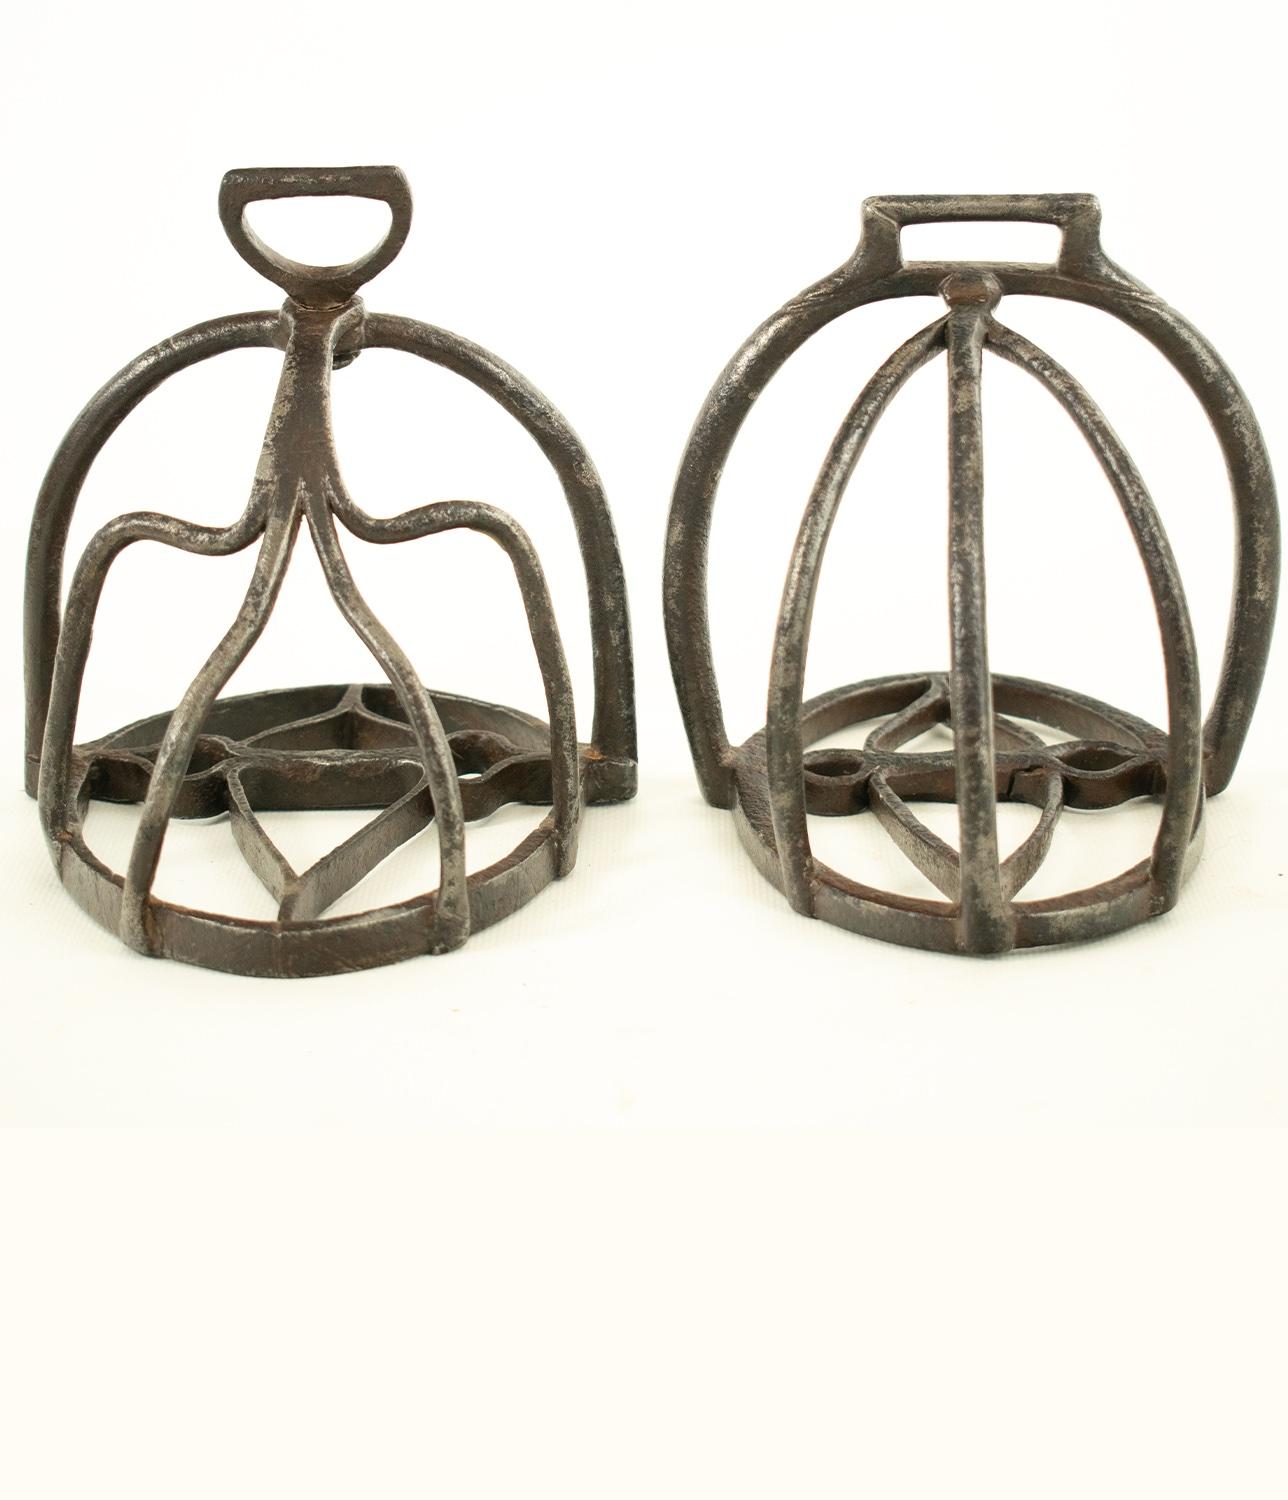 An interesting composed pair of original mid 17th/early 18th century cage or basket Stirrups.

Superbly hand forged and of the period in wrought iron with openwork branches and foot plate, one with a rotating attachment eye, good general condition